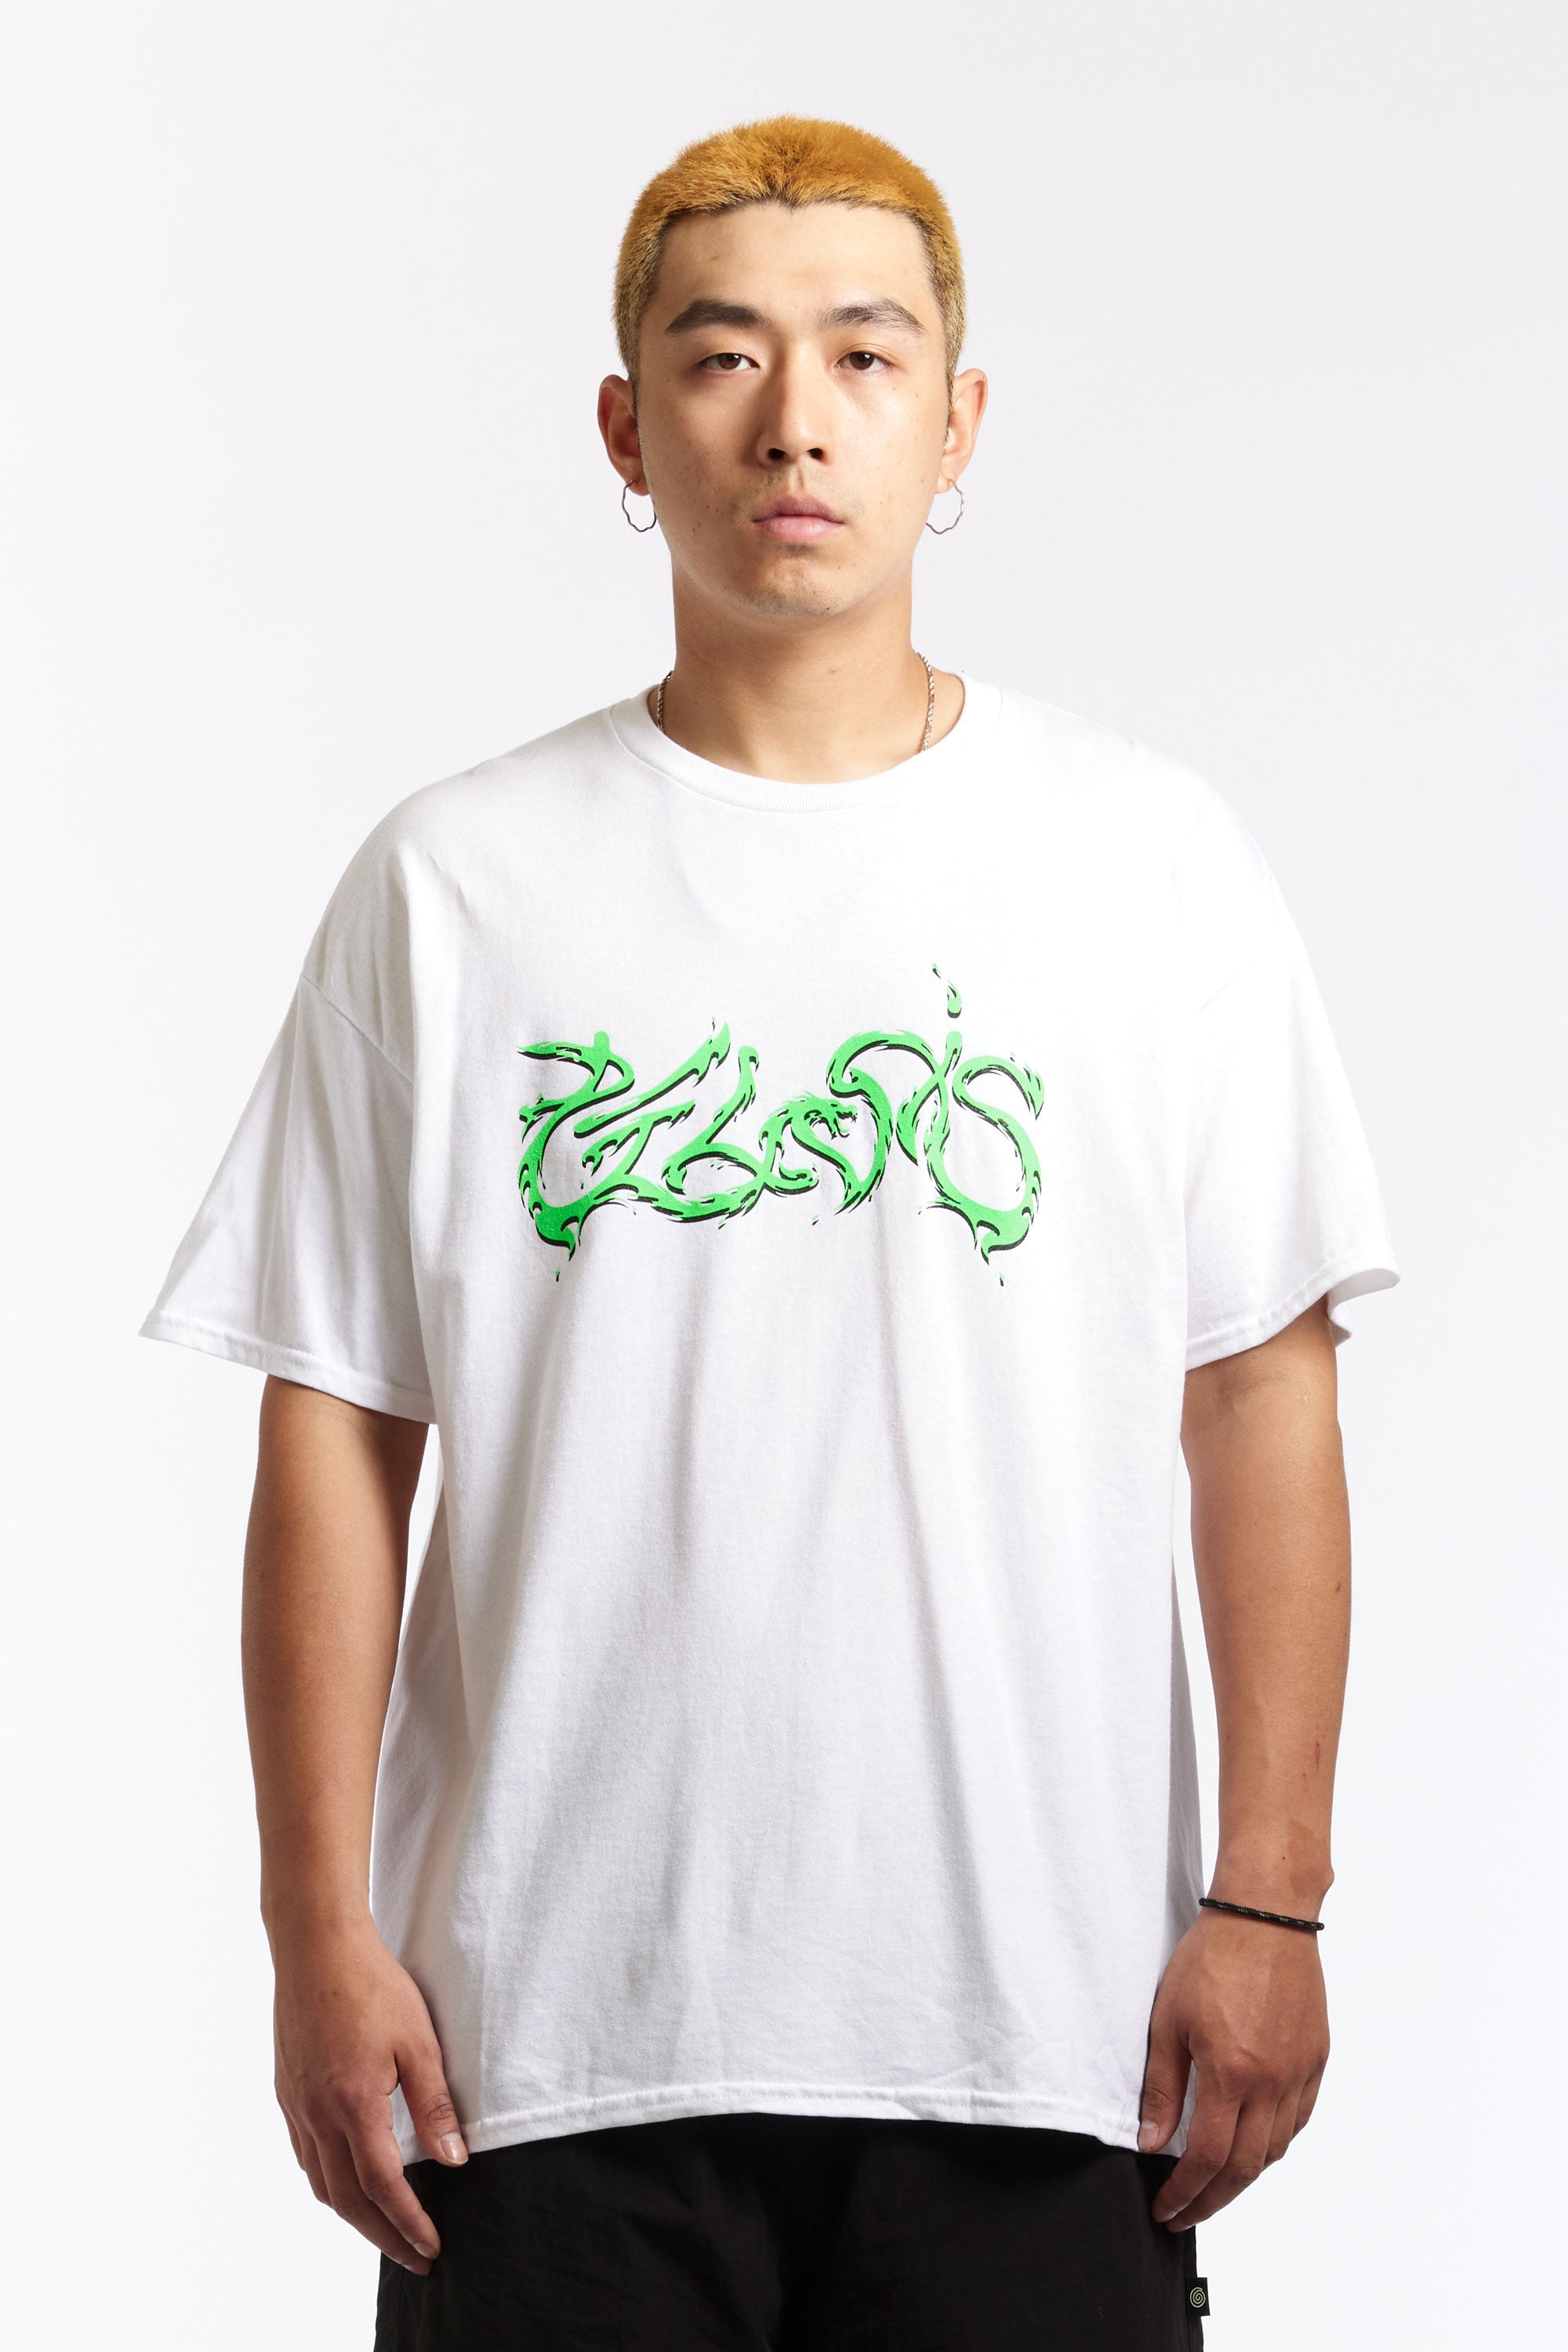 The PELVIS - CHAOS DRAGON TEE  available online with global shipping, and in PAM Stores Melbourne and Sydney.